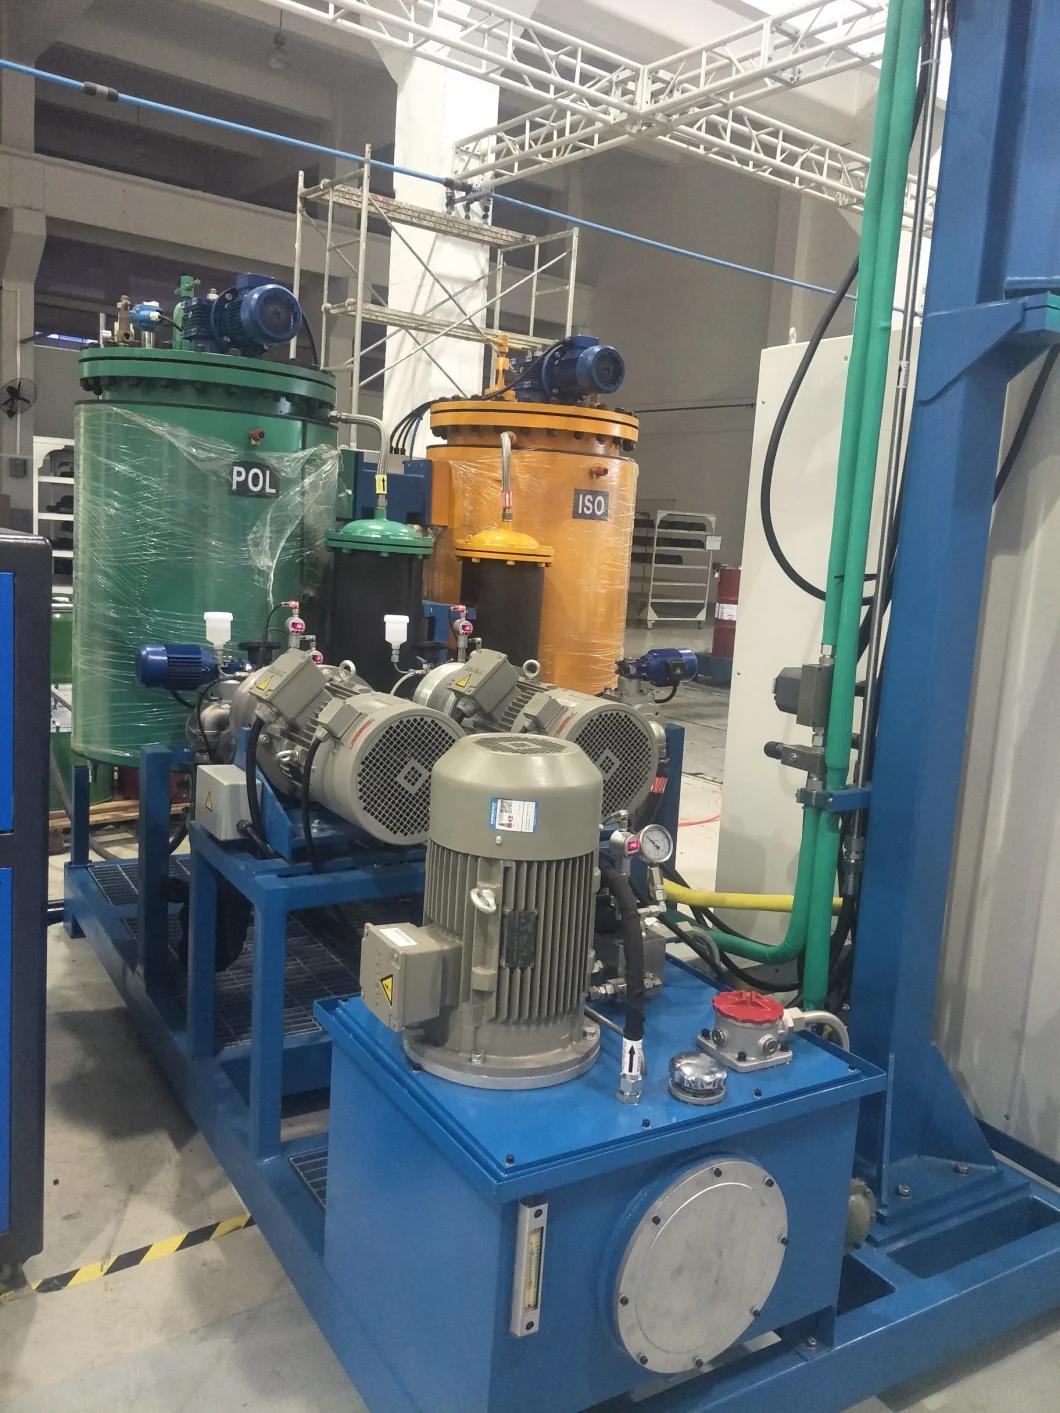 Polyurethane Foam Machine Equipped with Imported Flowmeters